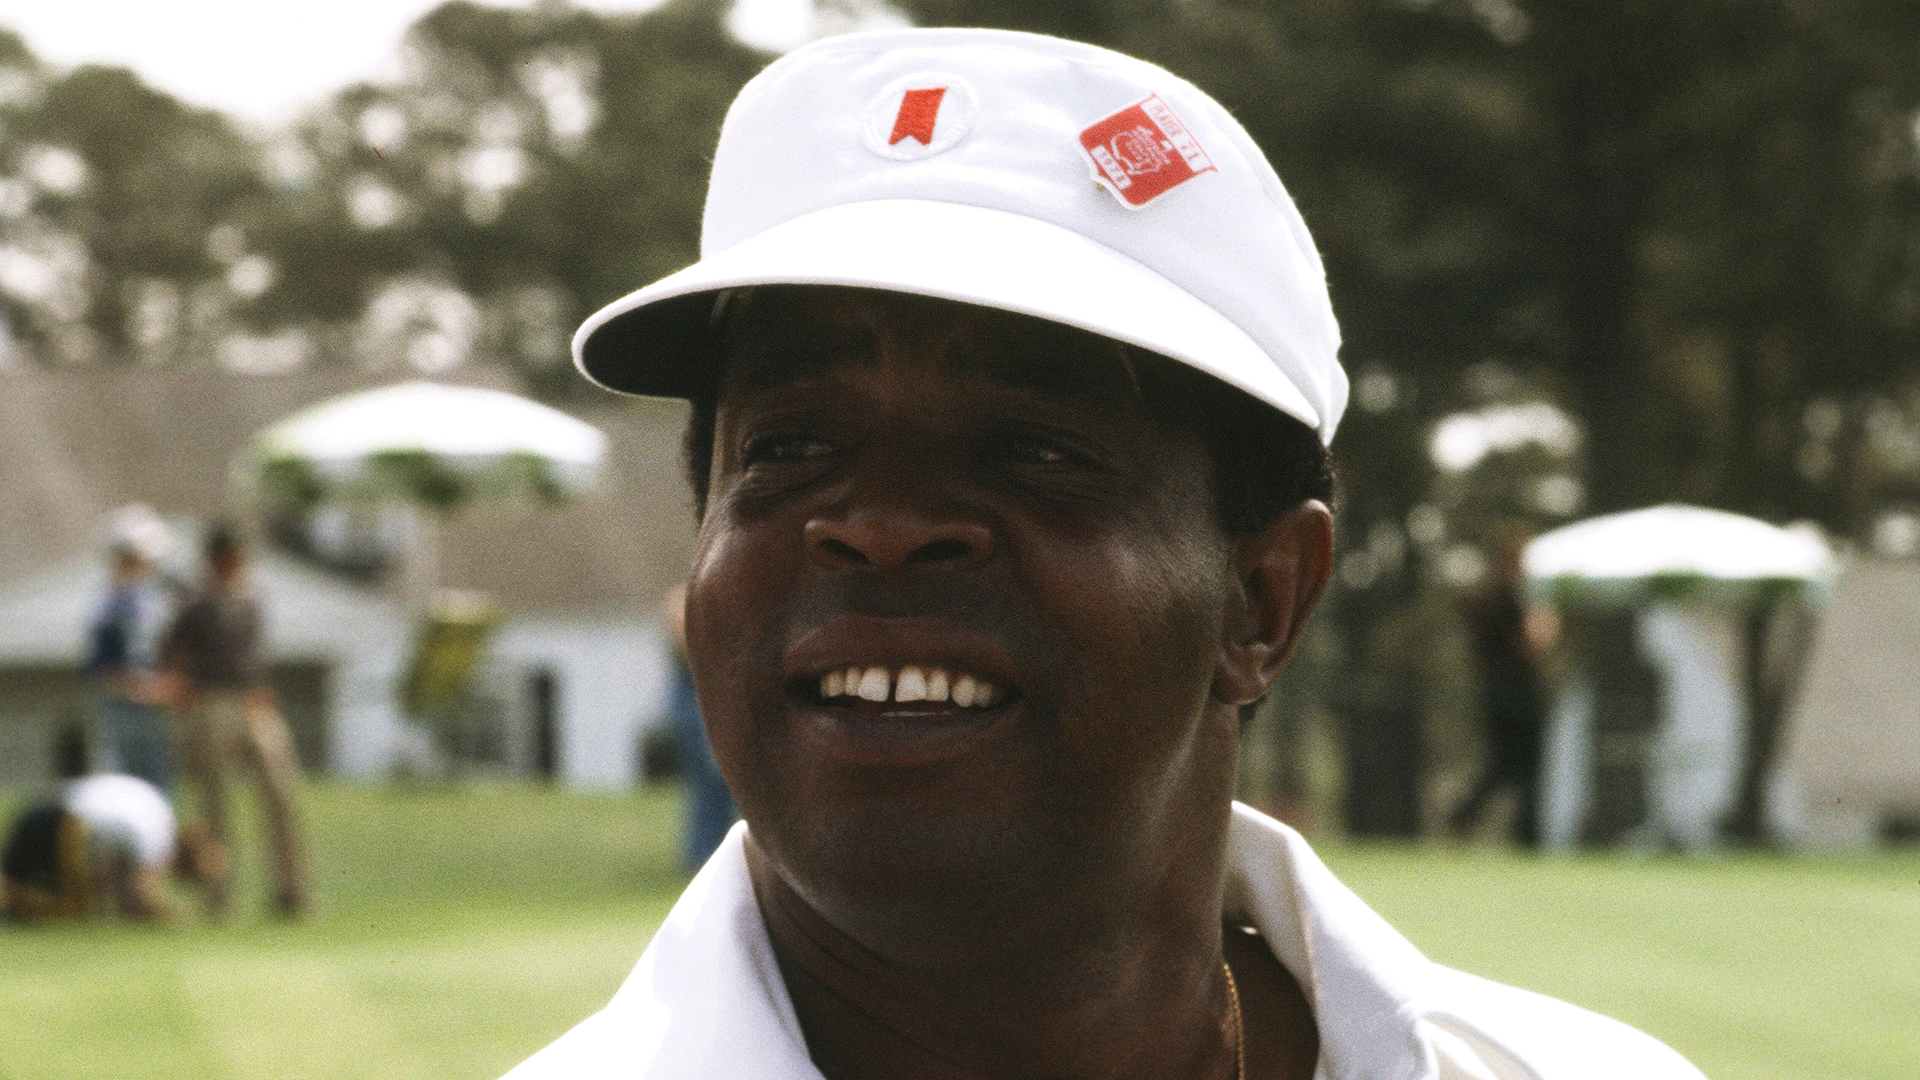 Lee Elder, who broke color barrier at Masters, to become honorary starter in 2021 2